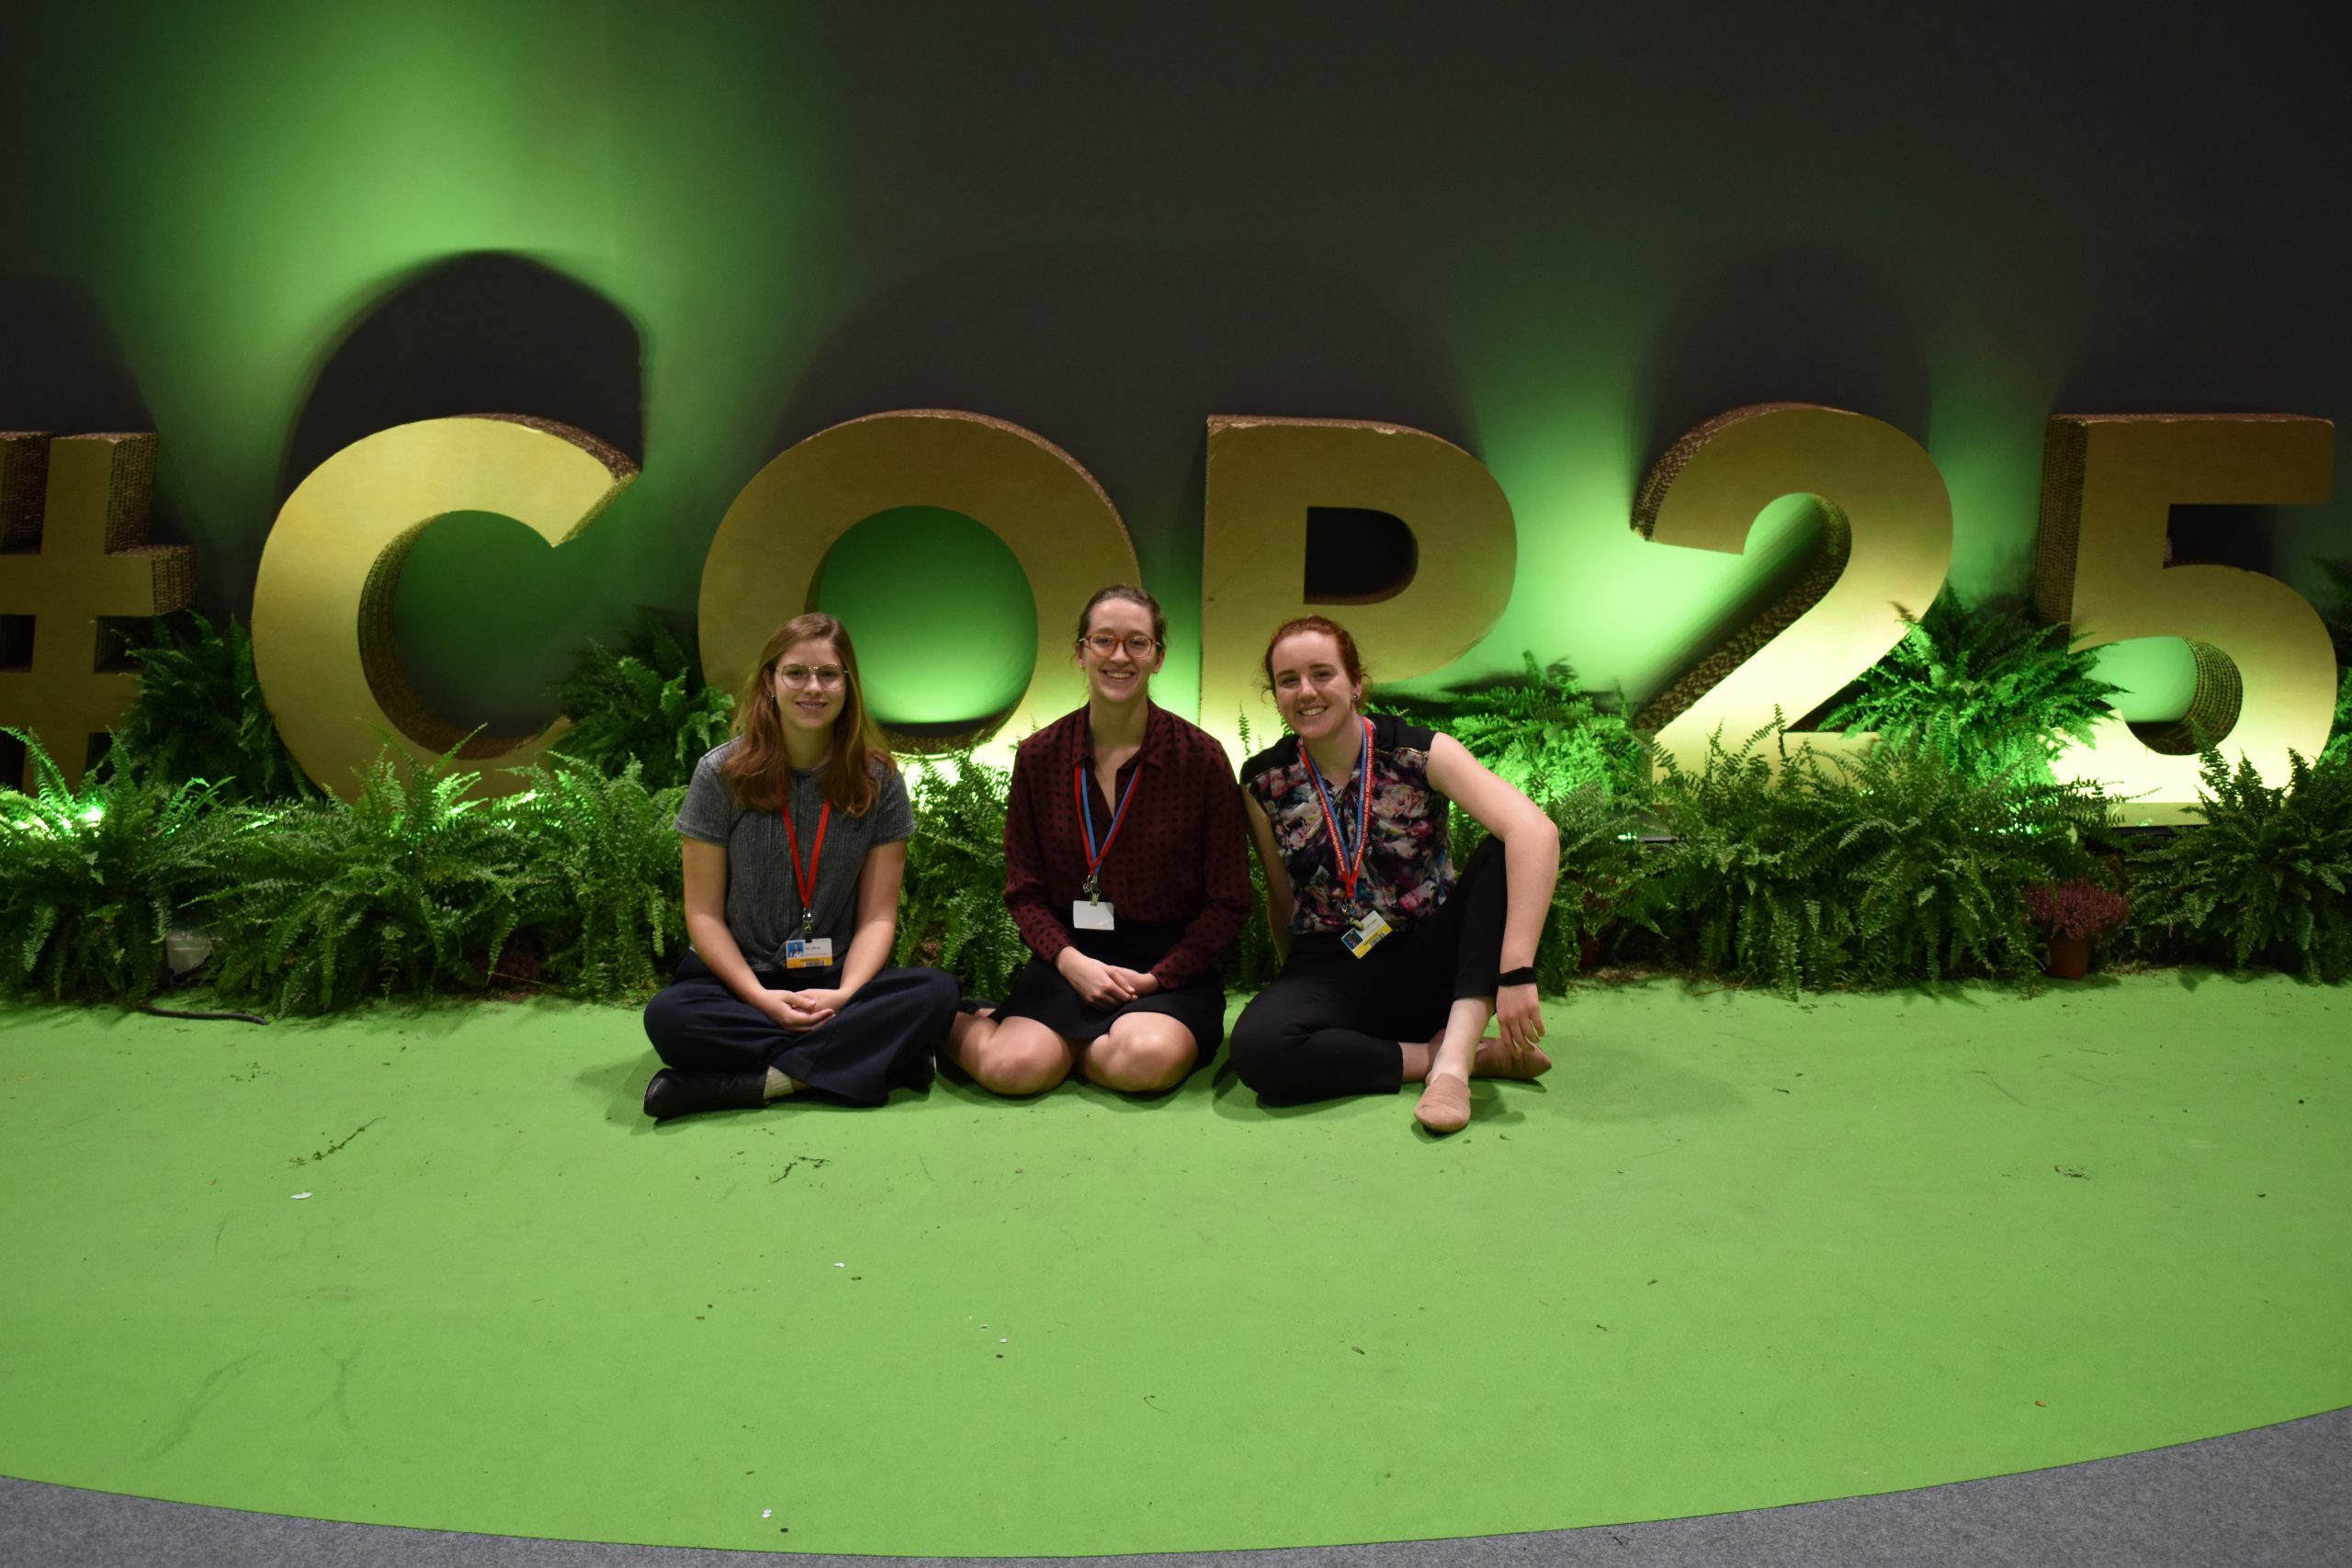 Megan Raisle (right) surrounded by two people in front of a COP 25 sign.